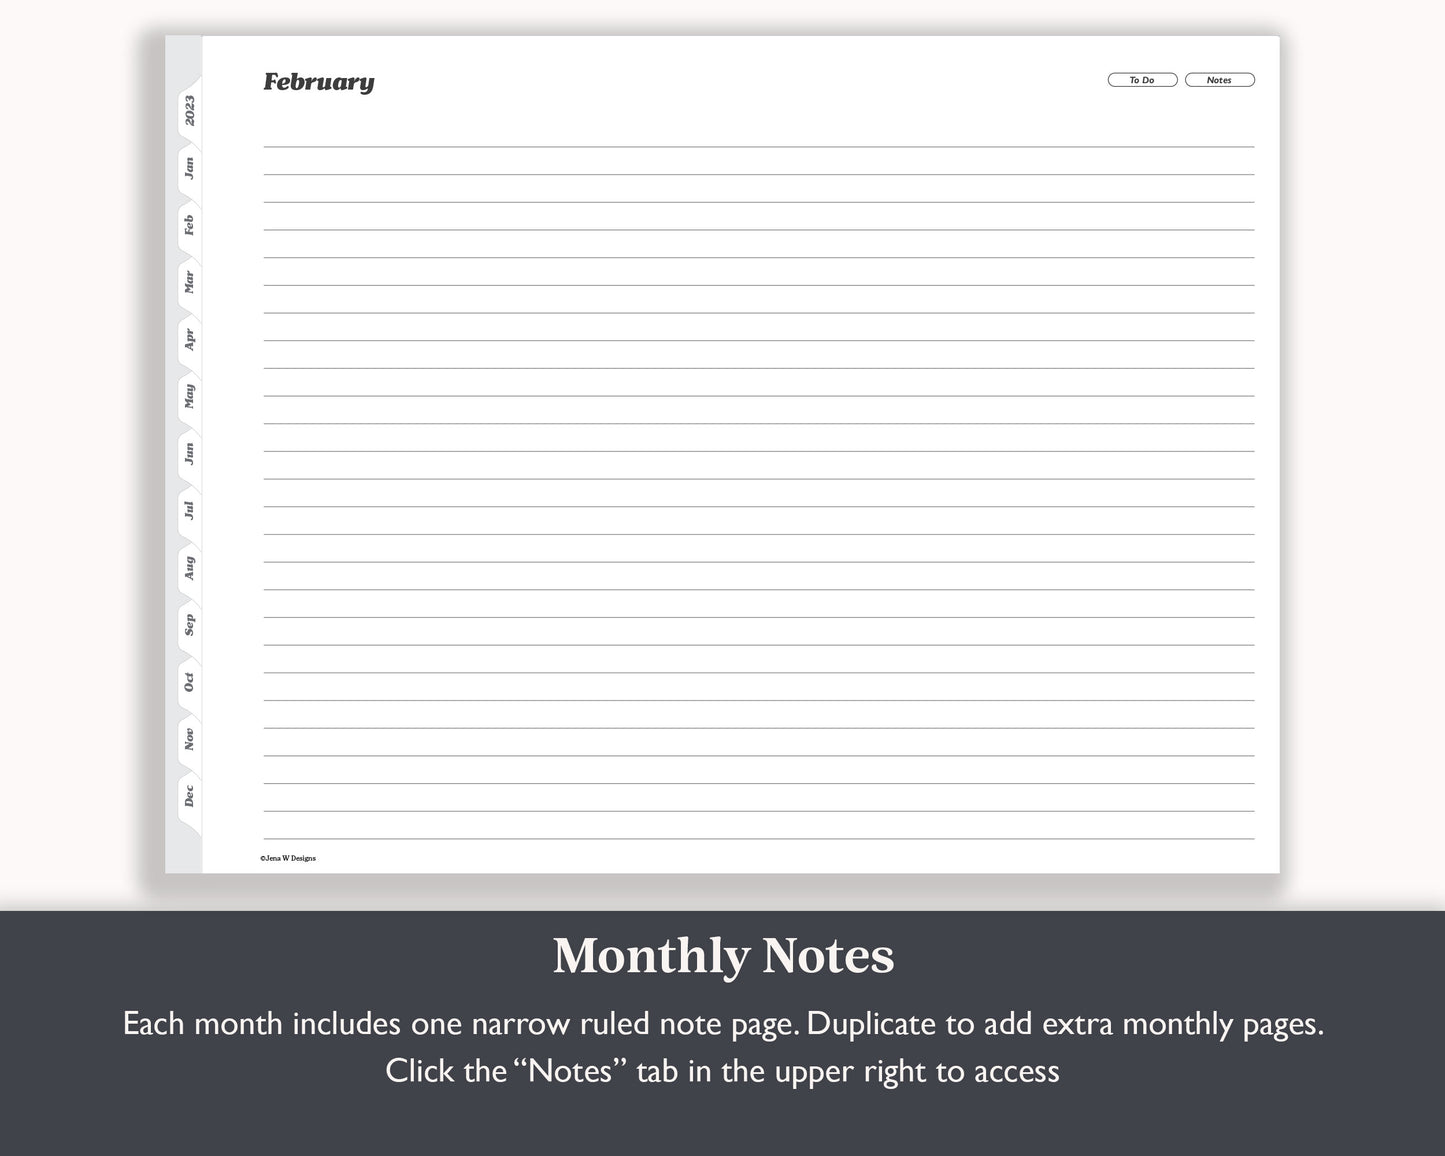 2023 Monthly Weekly Planner with To Do Lists | Landscape Planner for e-ink Devices